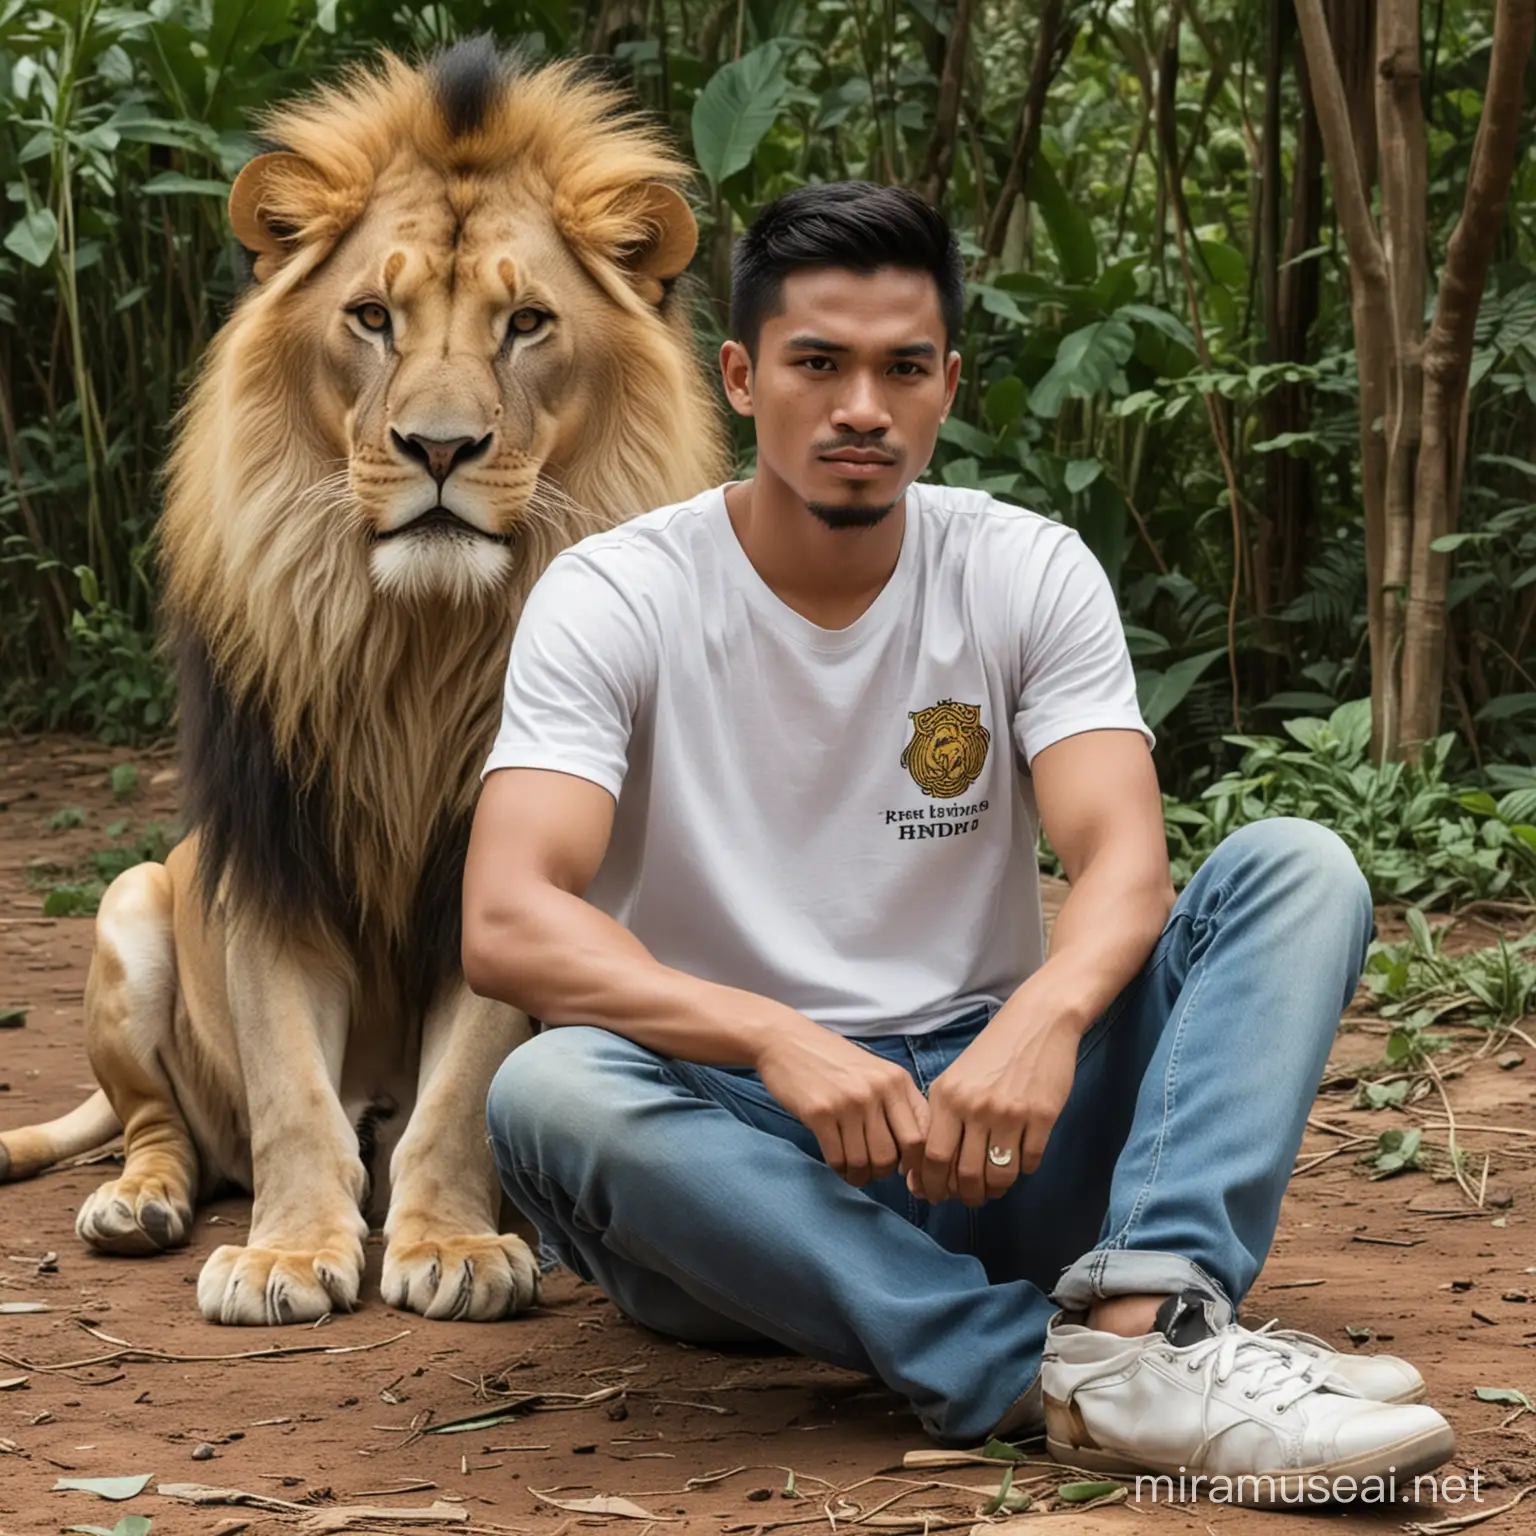 picture of a 25 year old Indonesian man and a lion sitting on the ground together. The man was wearing a shirt, a white t-shirt that said "Hendri", jeans and shoes. The lion seemed silent and the man was holding the lion. They are in the jungle.
